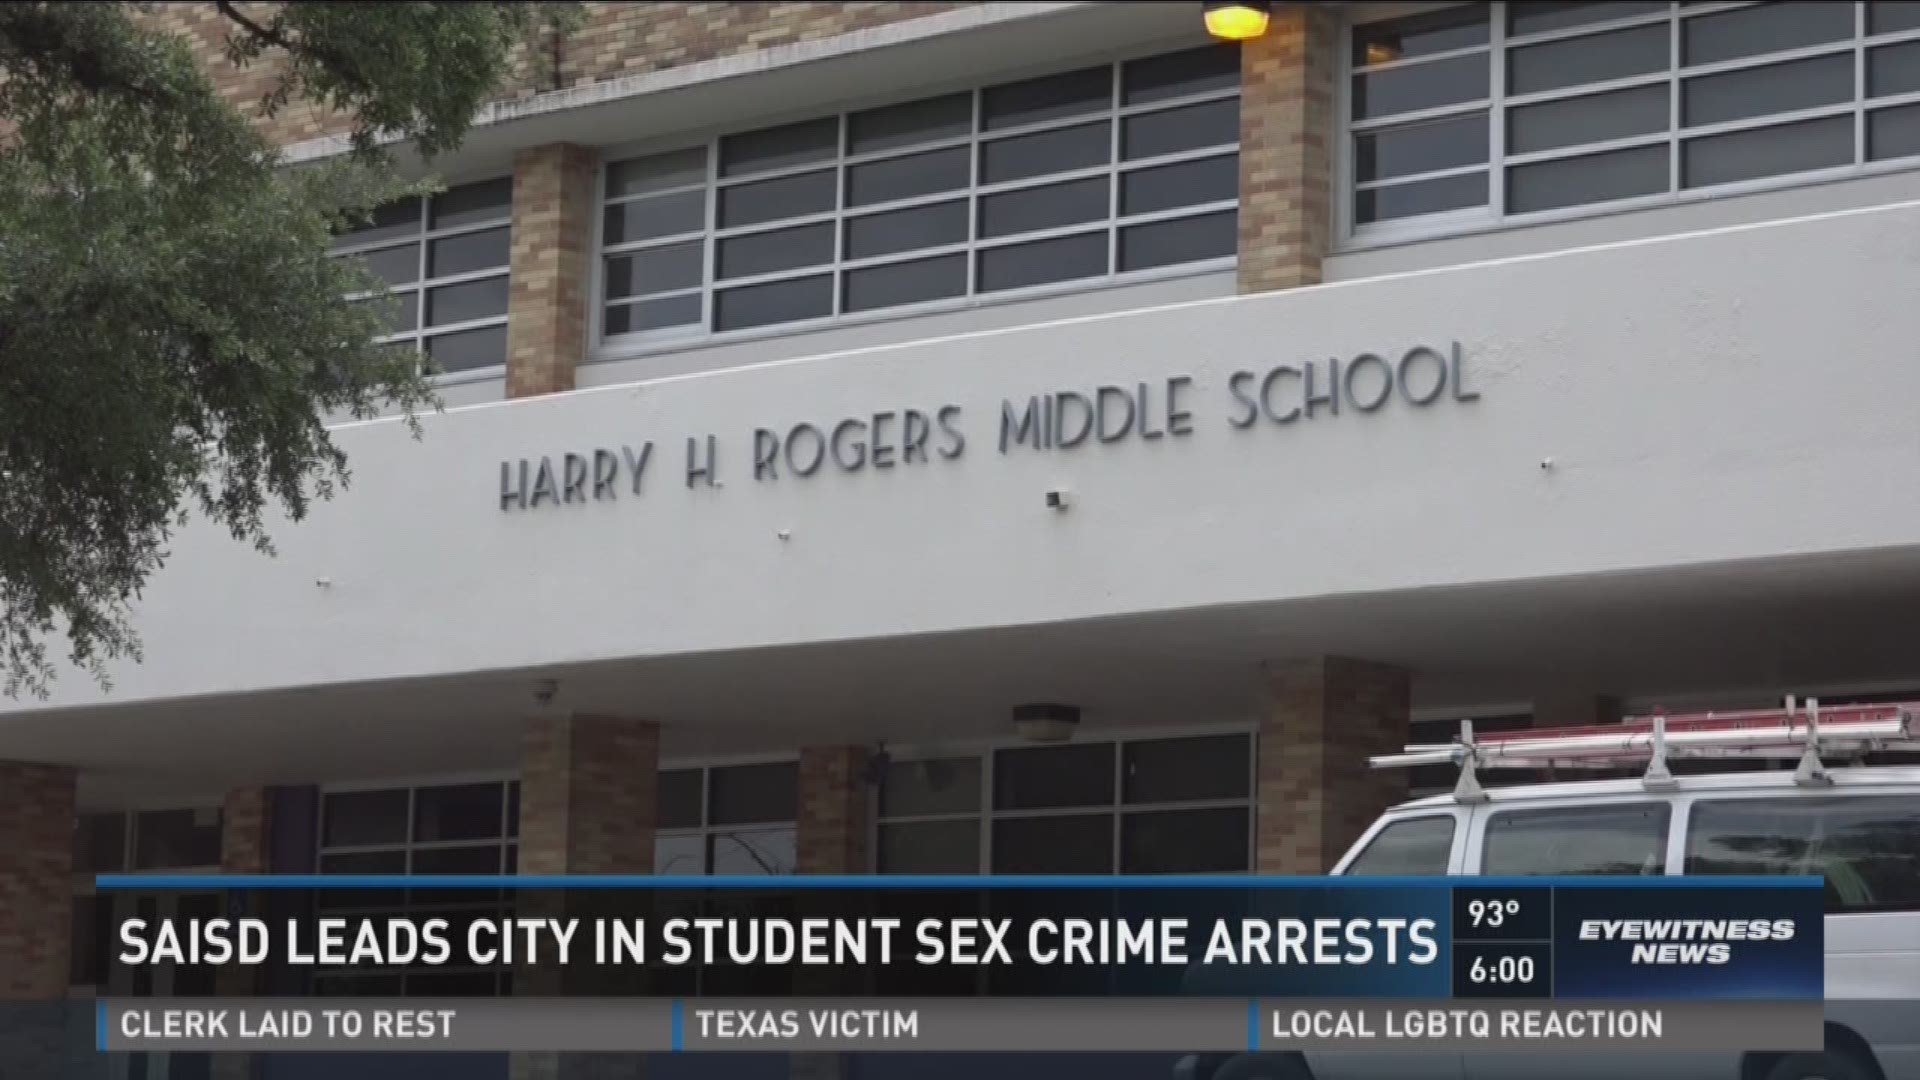 I-Team: SAISD leads city in student sex crimes on campus | kens5.com